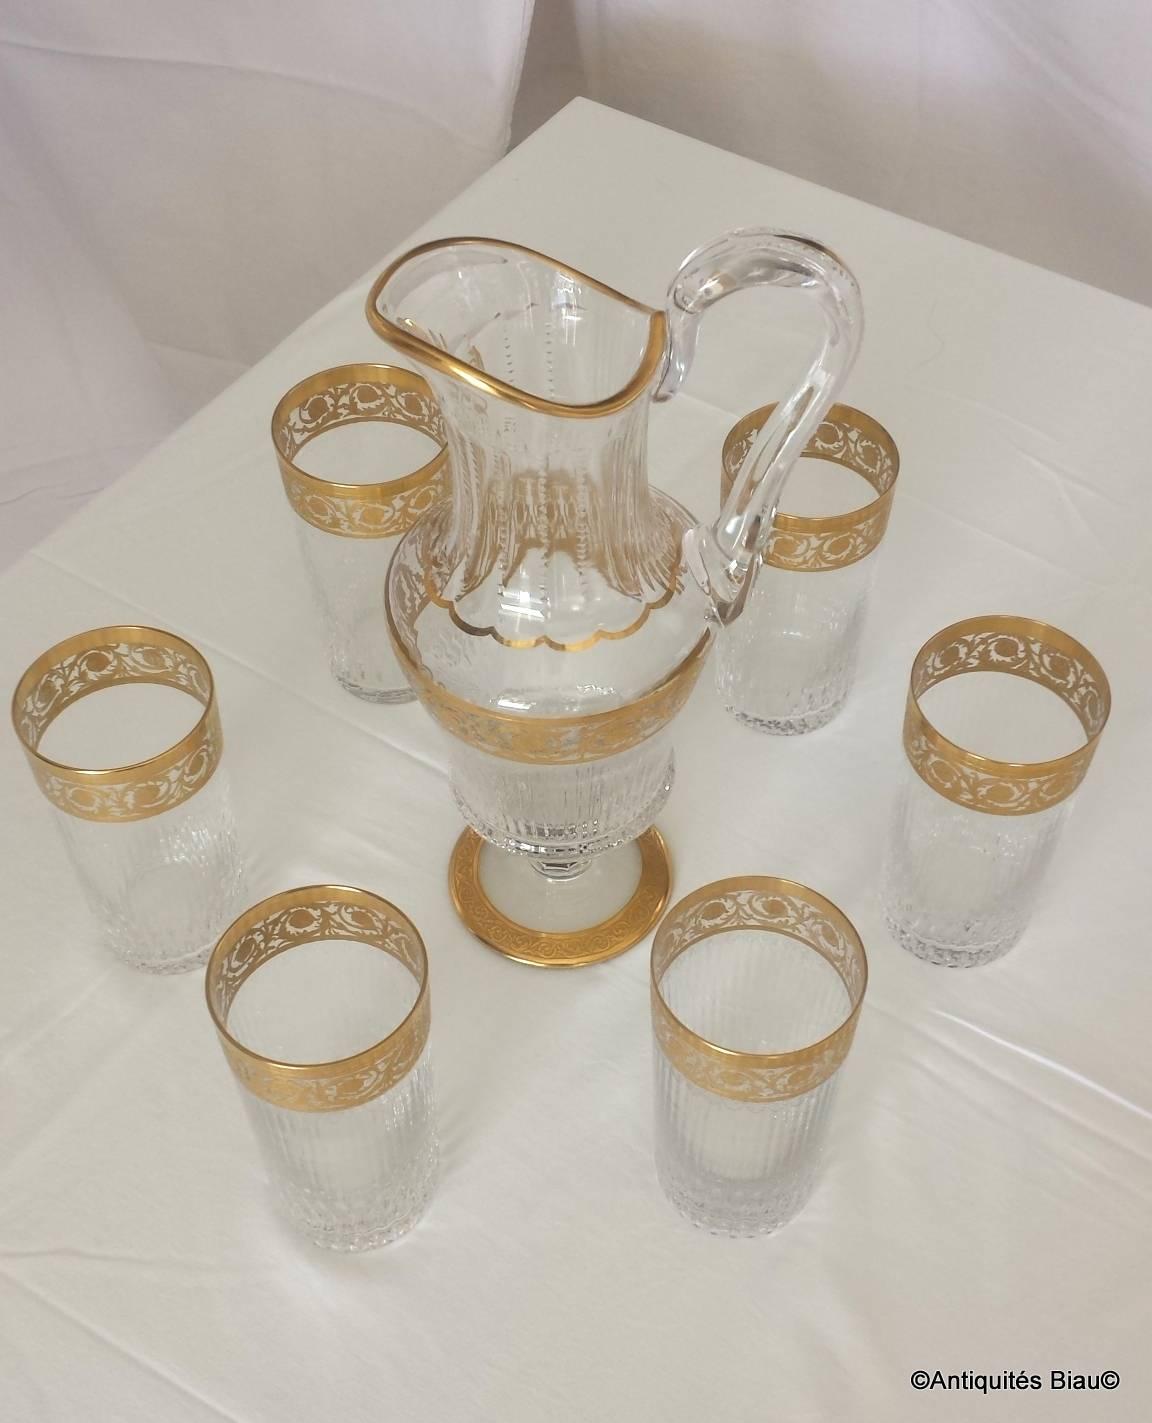 Six gold large highballs in crystal of Saint Louis (14cm) model gold thistle with gold water jug thistle (32.5cm) in perfect condition crystal and golden. The thistle was the original inspiration behind this service when it was created for the Nancy